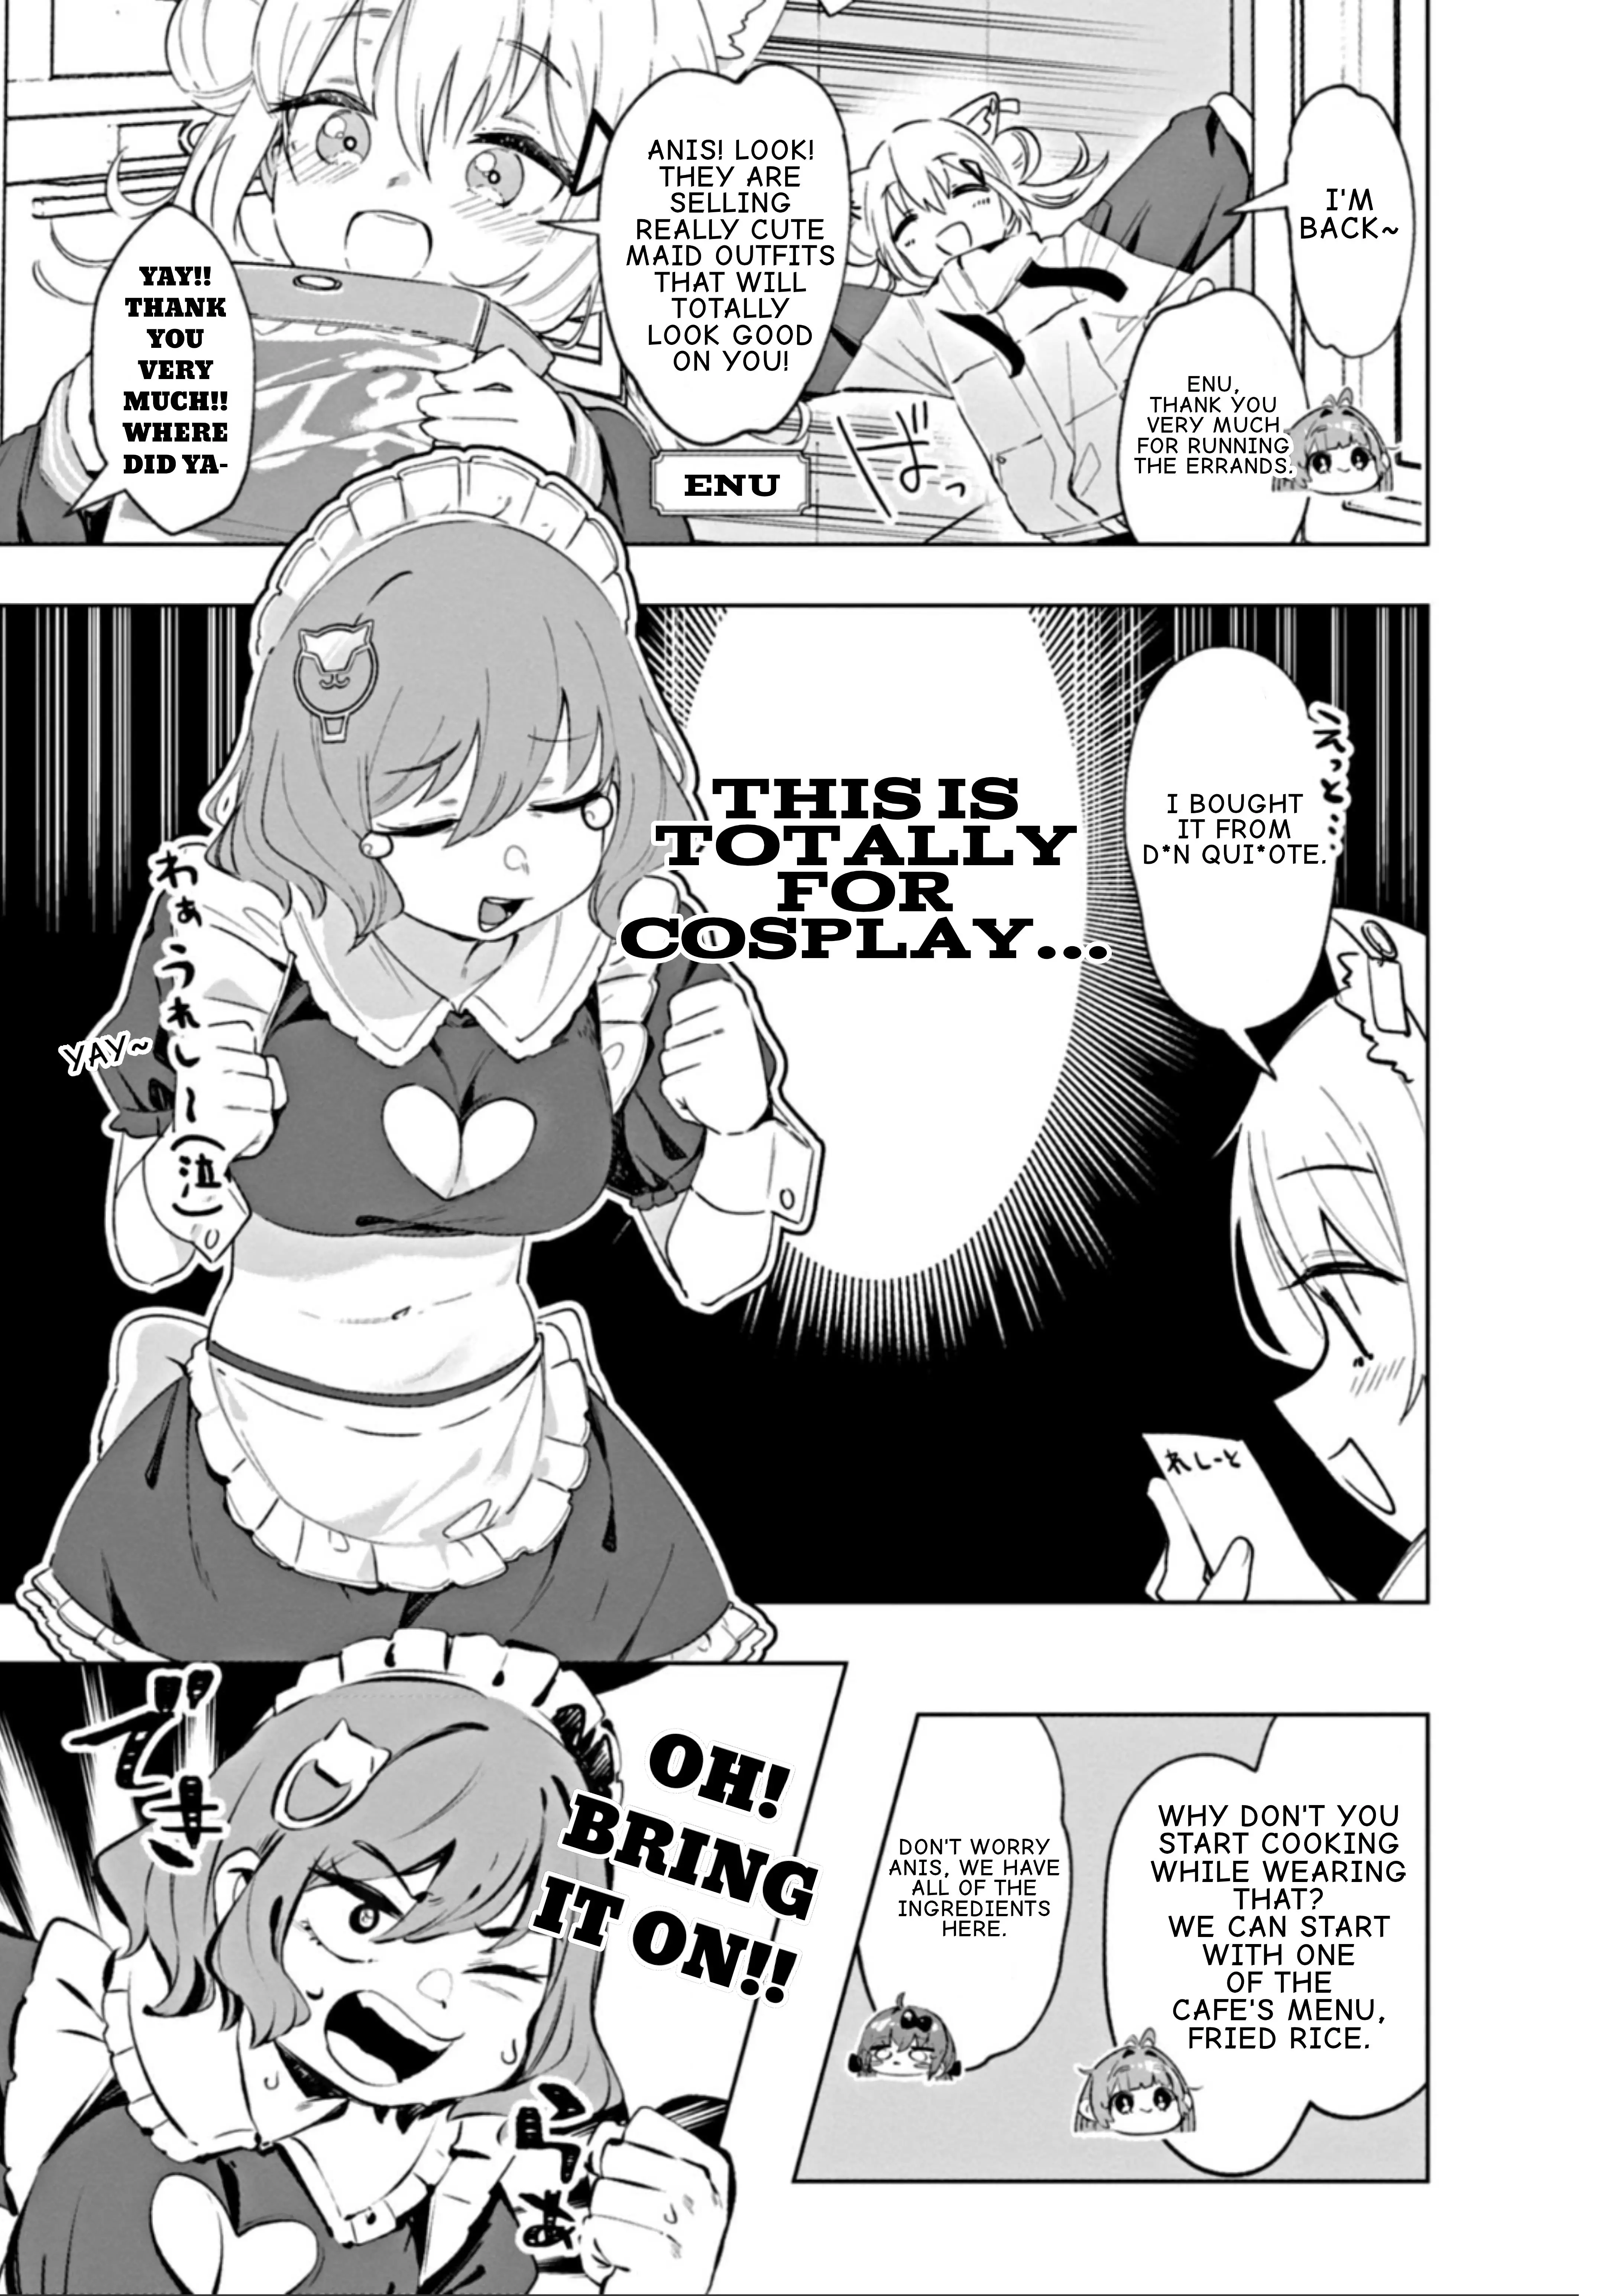 Goddess Of Victory: Nikke - Sweet Encount - 4 page 5-53448e45